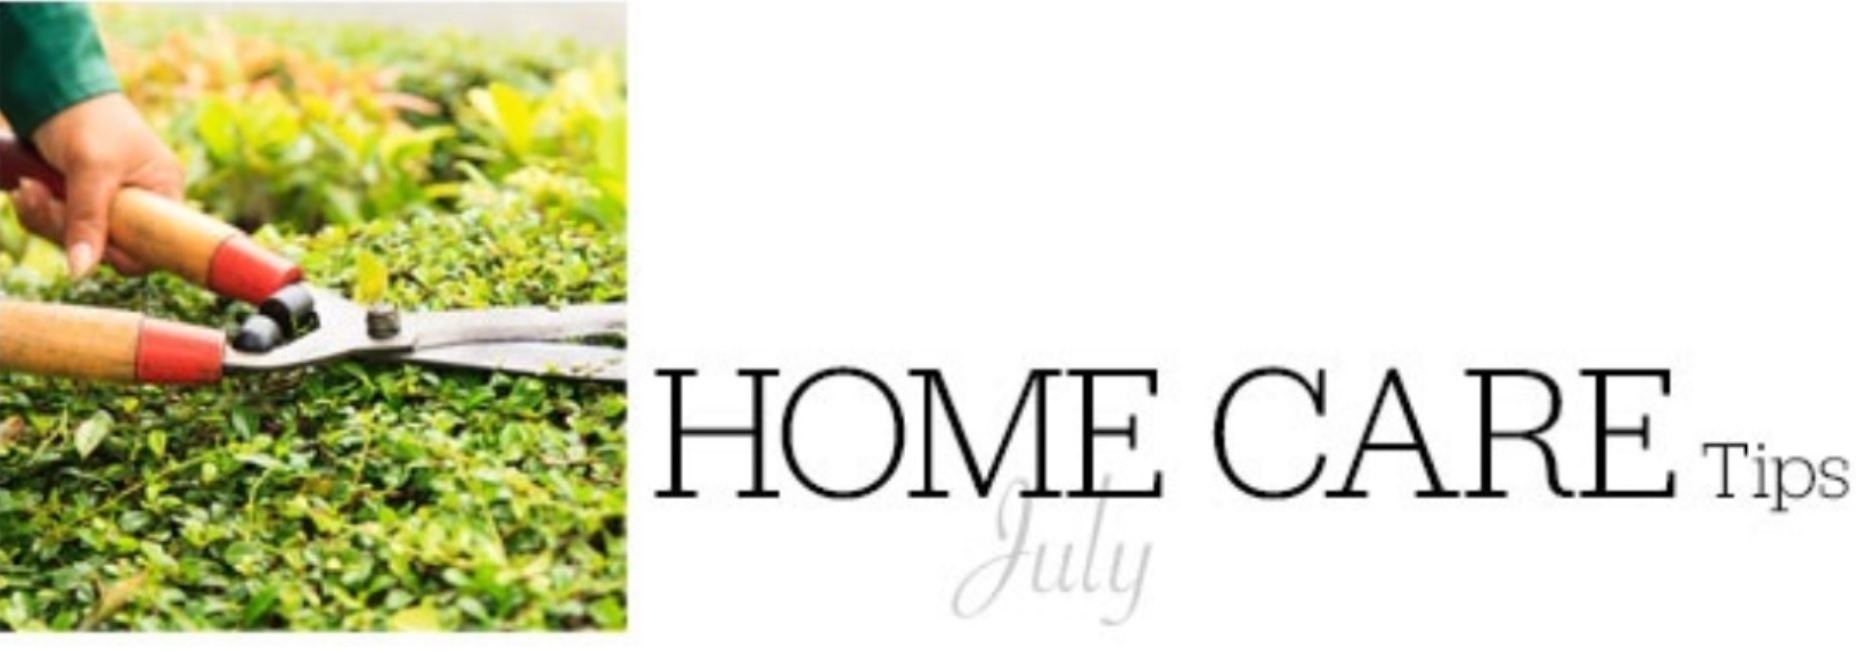 24 Home Care Tips For July